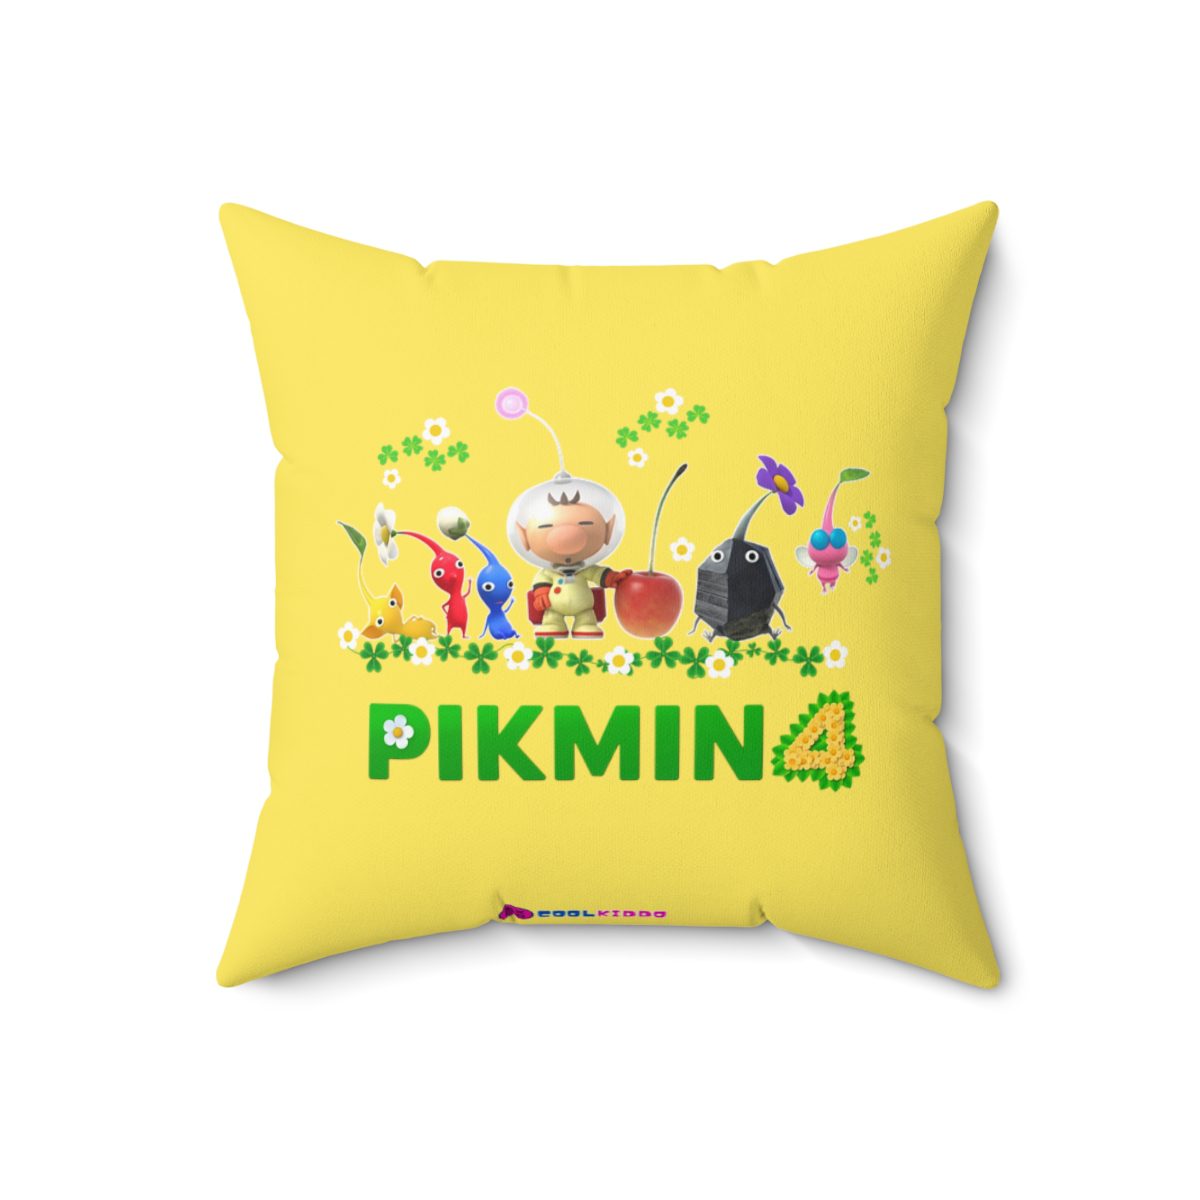 Pikmin 4 Yellow and Light Green Cushion (Double-Sided) Cool Kiddo 18